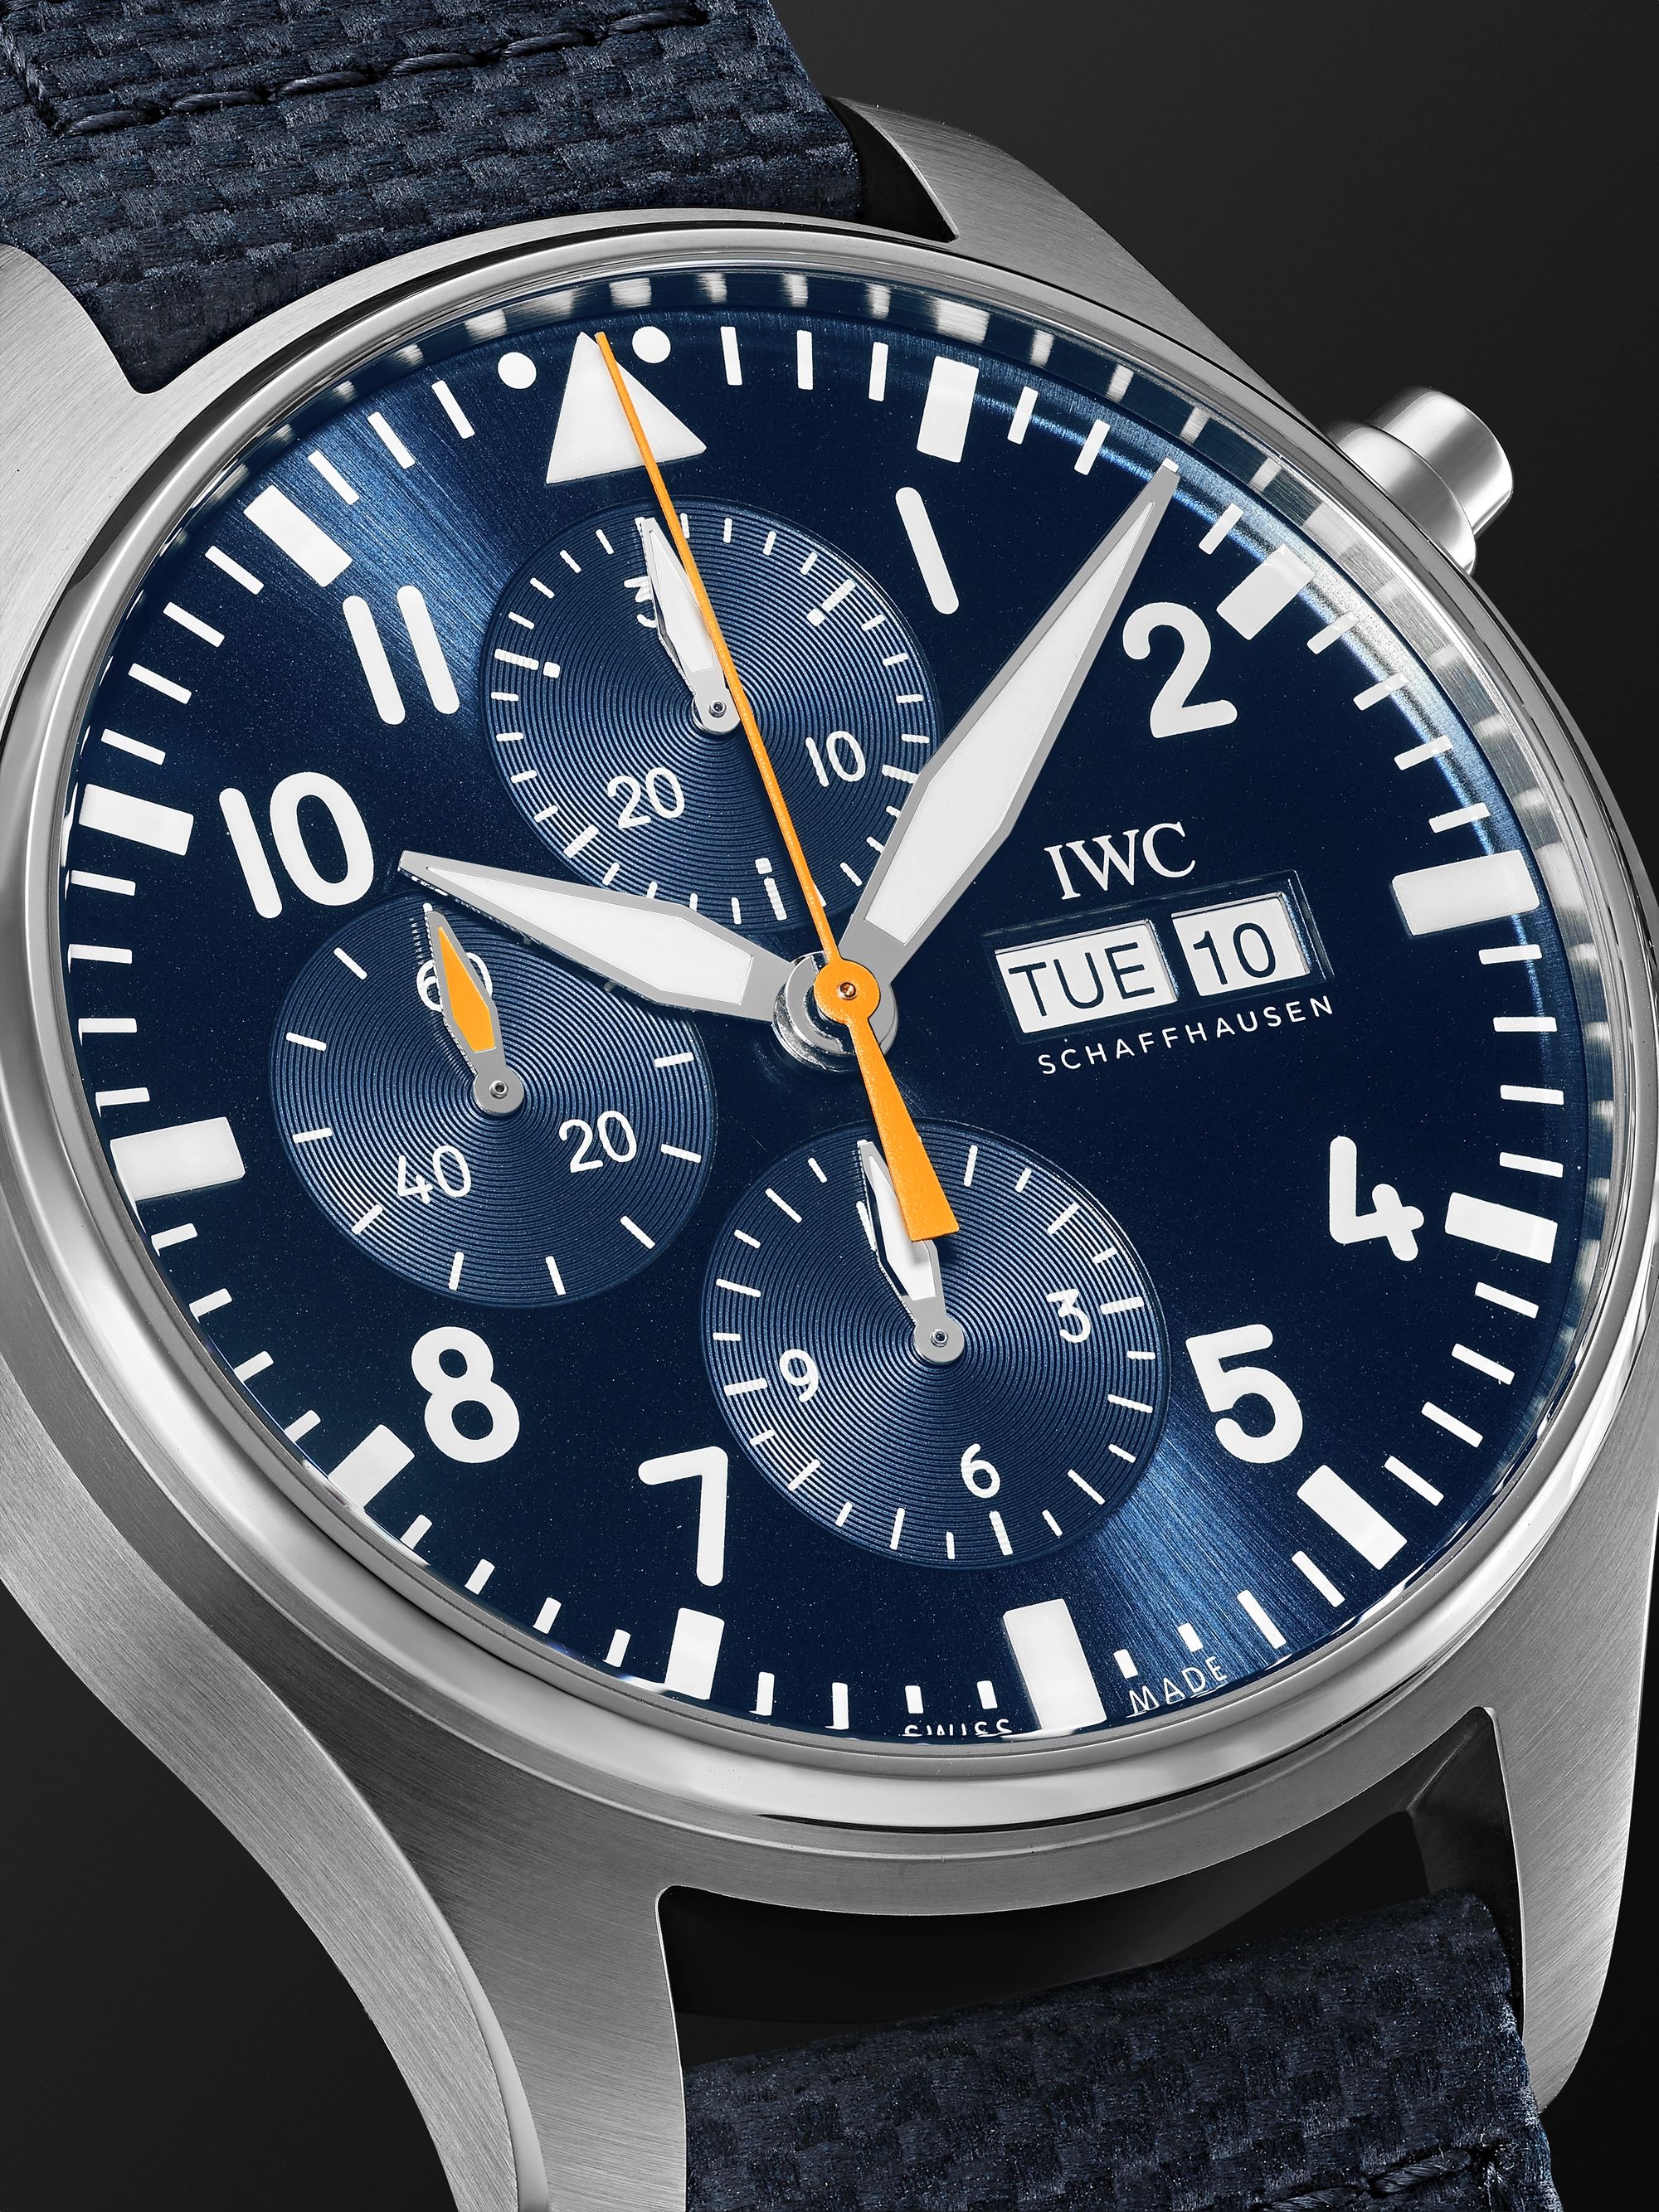 IWC SCHAFFHAUSEN Pilot's Automatic Chronograph 43mm Stainless Steel and Leather Watch, Ref. No. IW377729